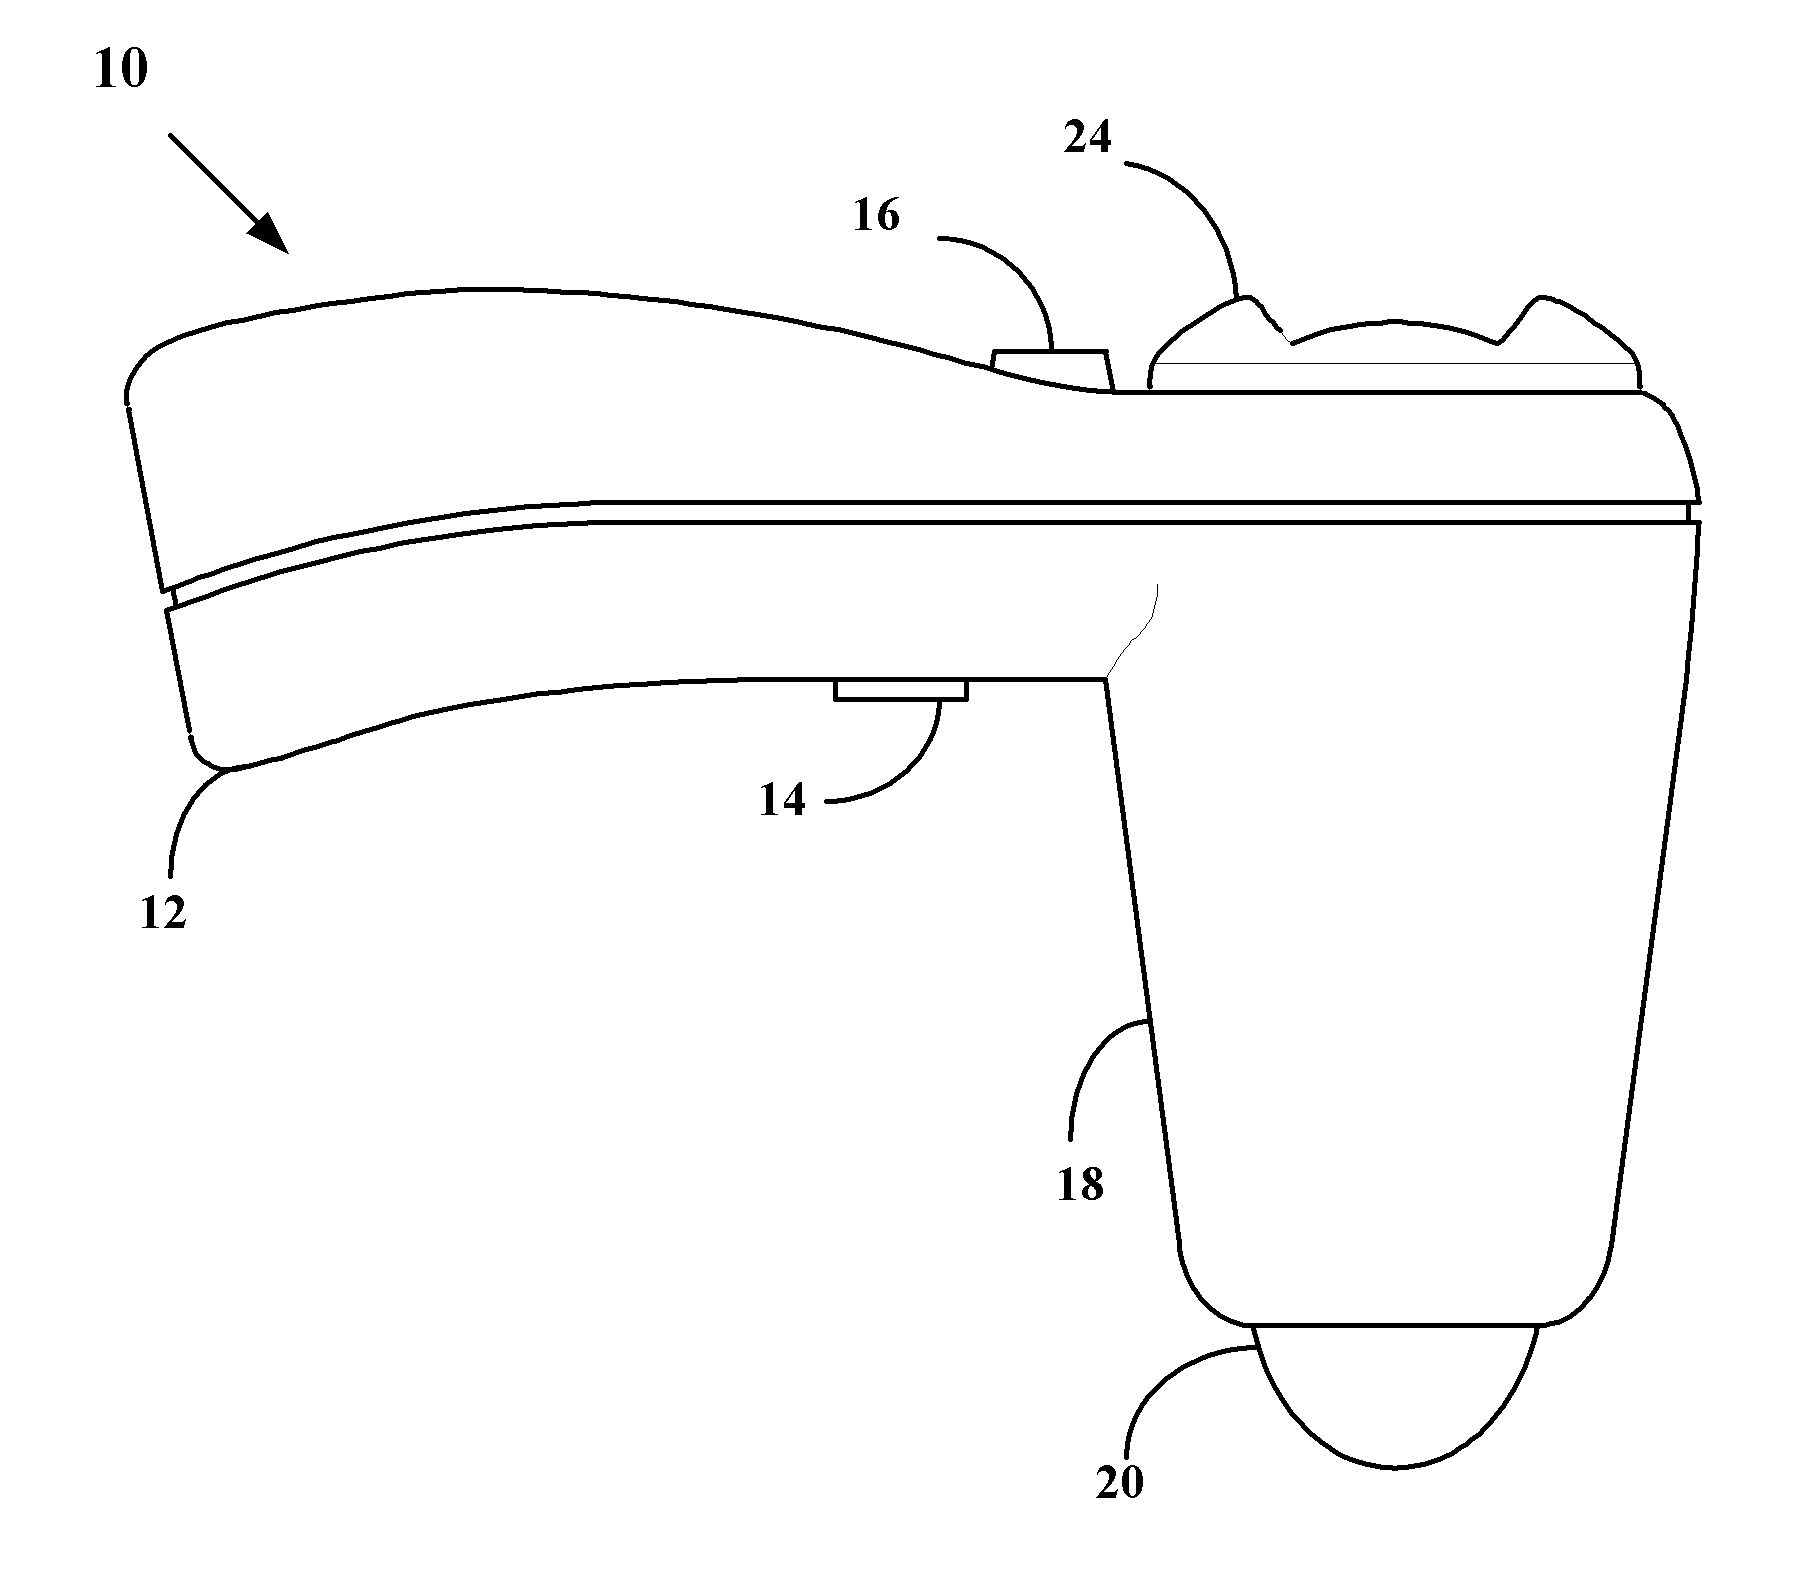 Ultrasound system and method for measuring bladder wall thickness and mass